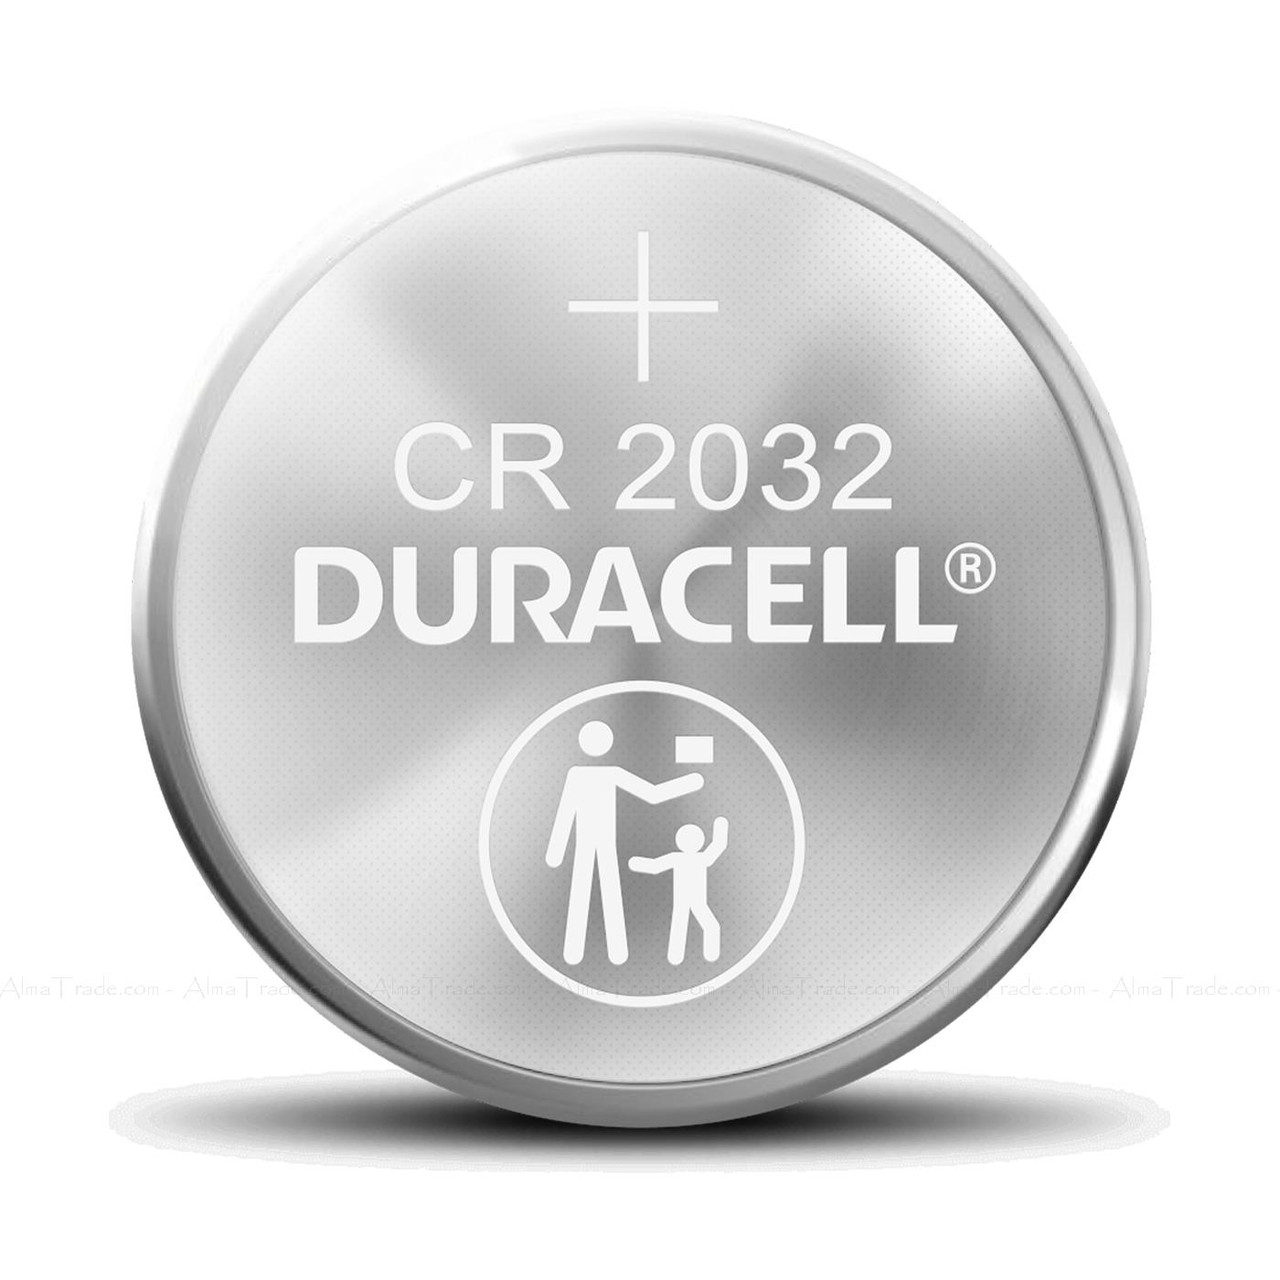 Duracell 2032 Lithium Coin Batteries, 12-count